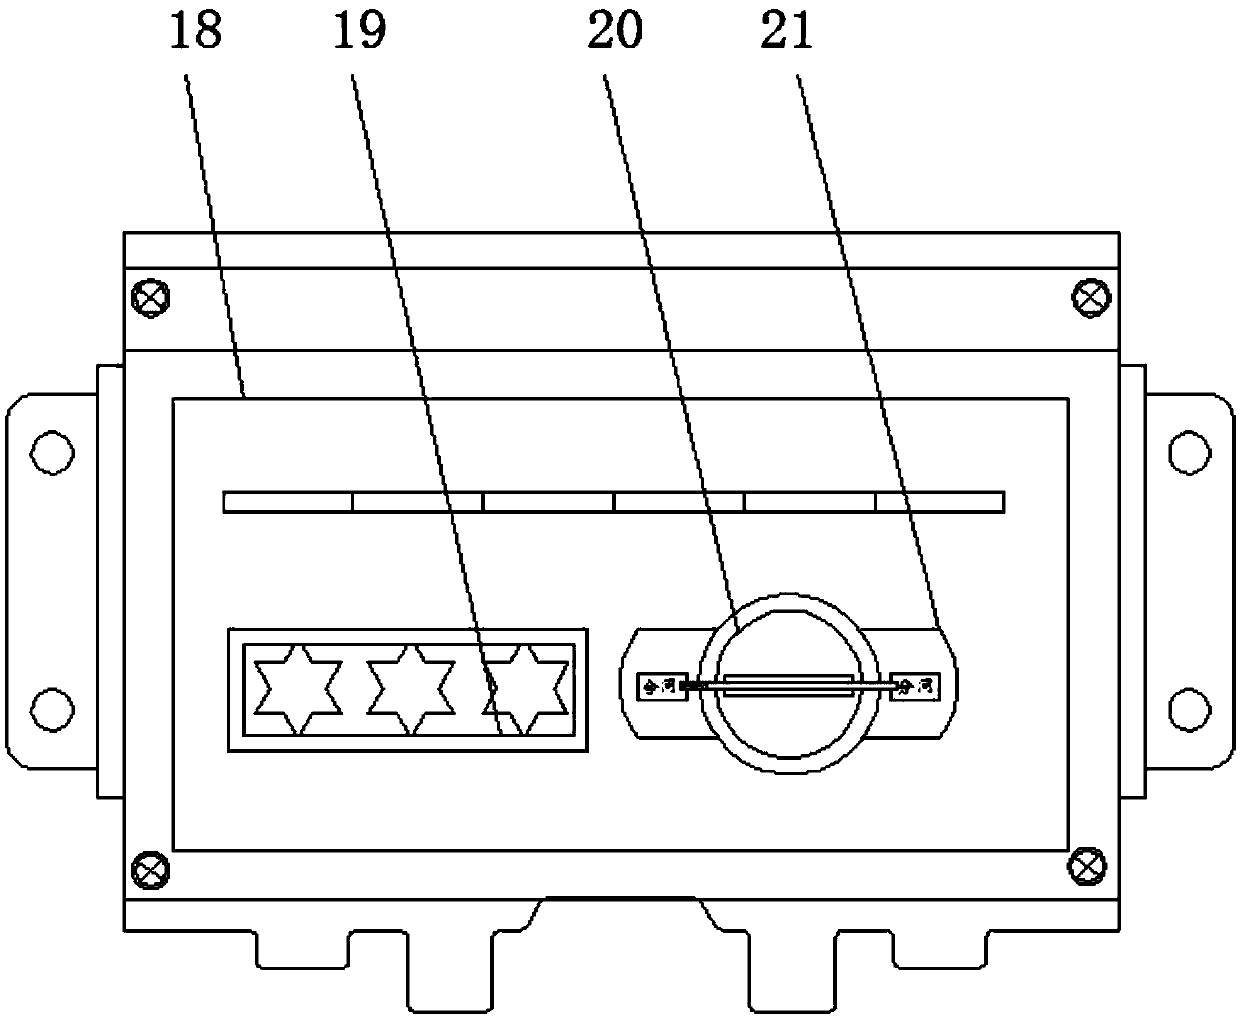 On/off switch device of novel high-voltage switchgear cabinet